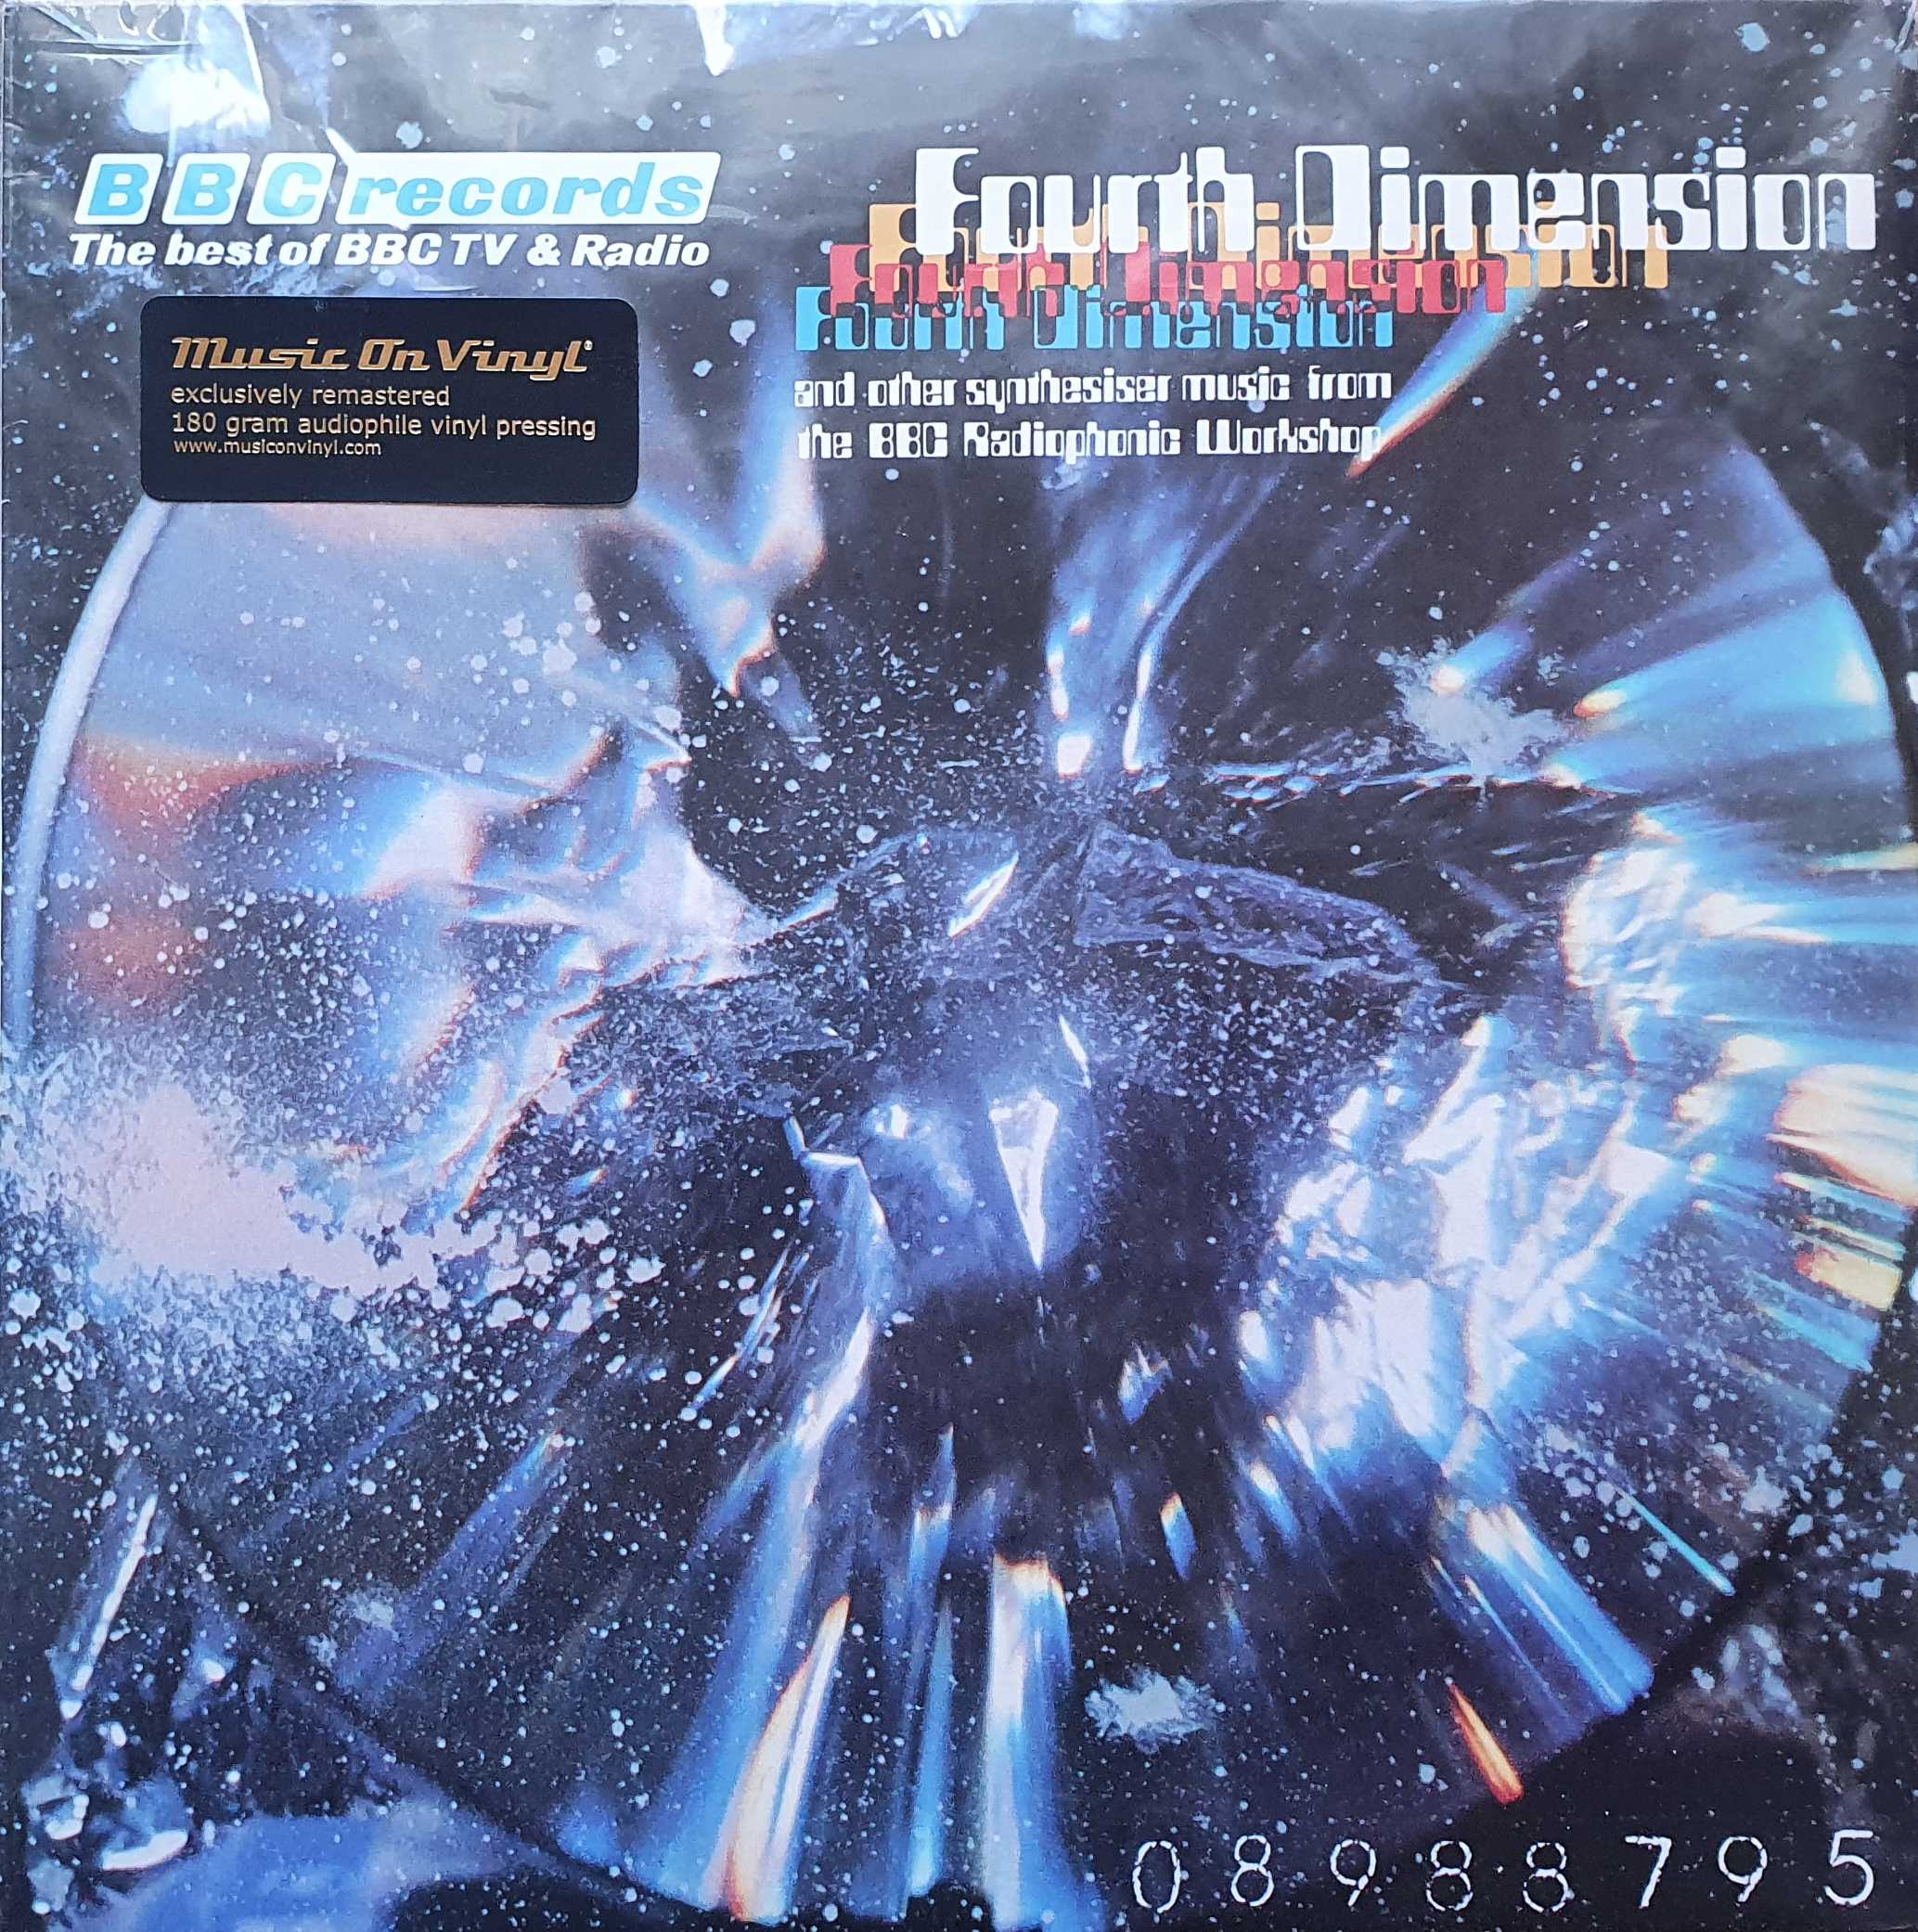 Picture of The fourth dimension by artist Paddy Kingsland / BBC Radiophonic Workshop from the BBC albums - Records and Tapes library